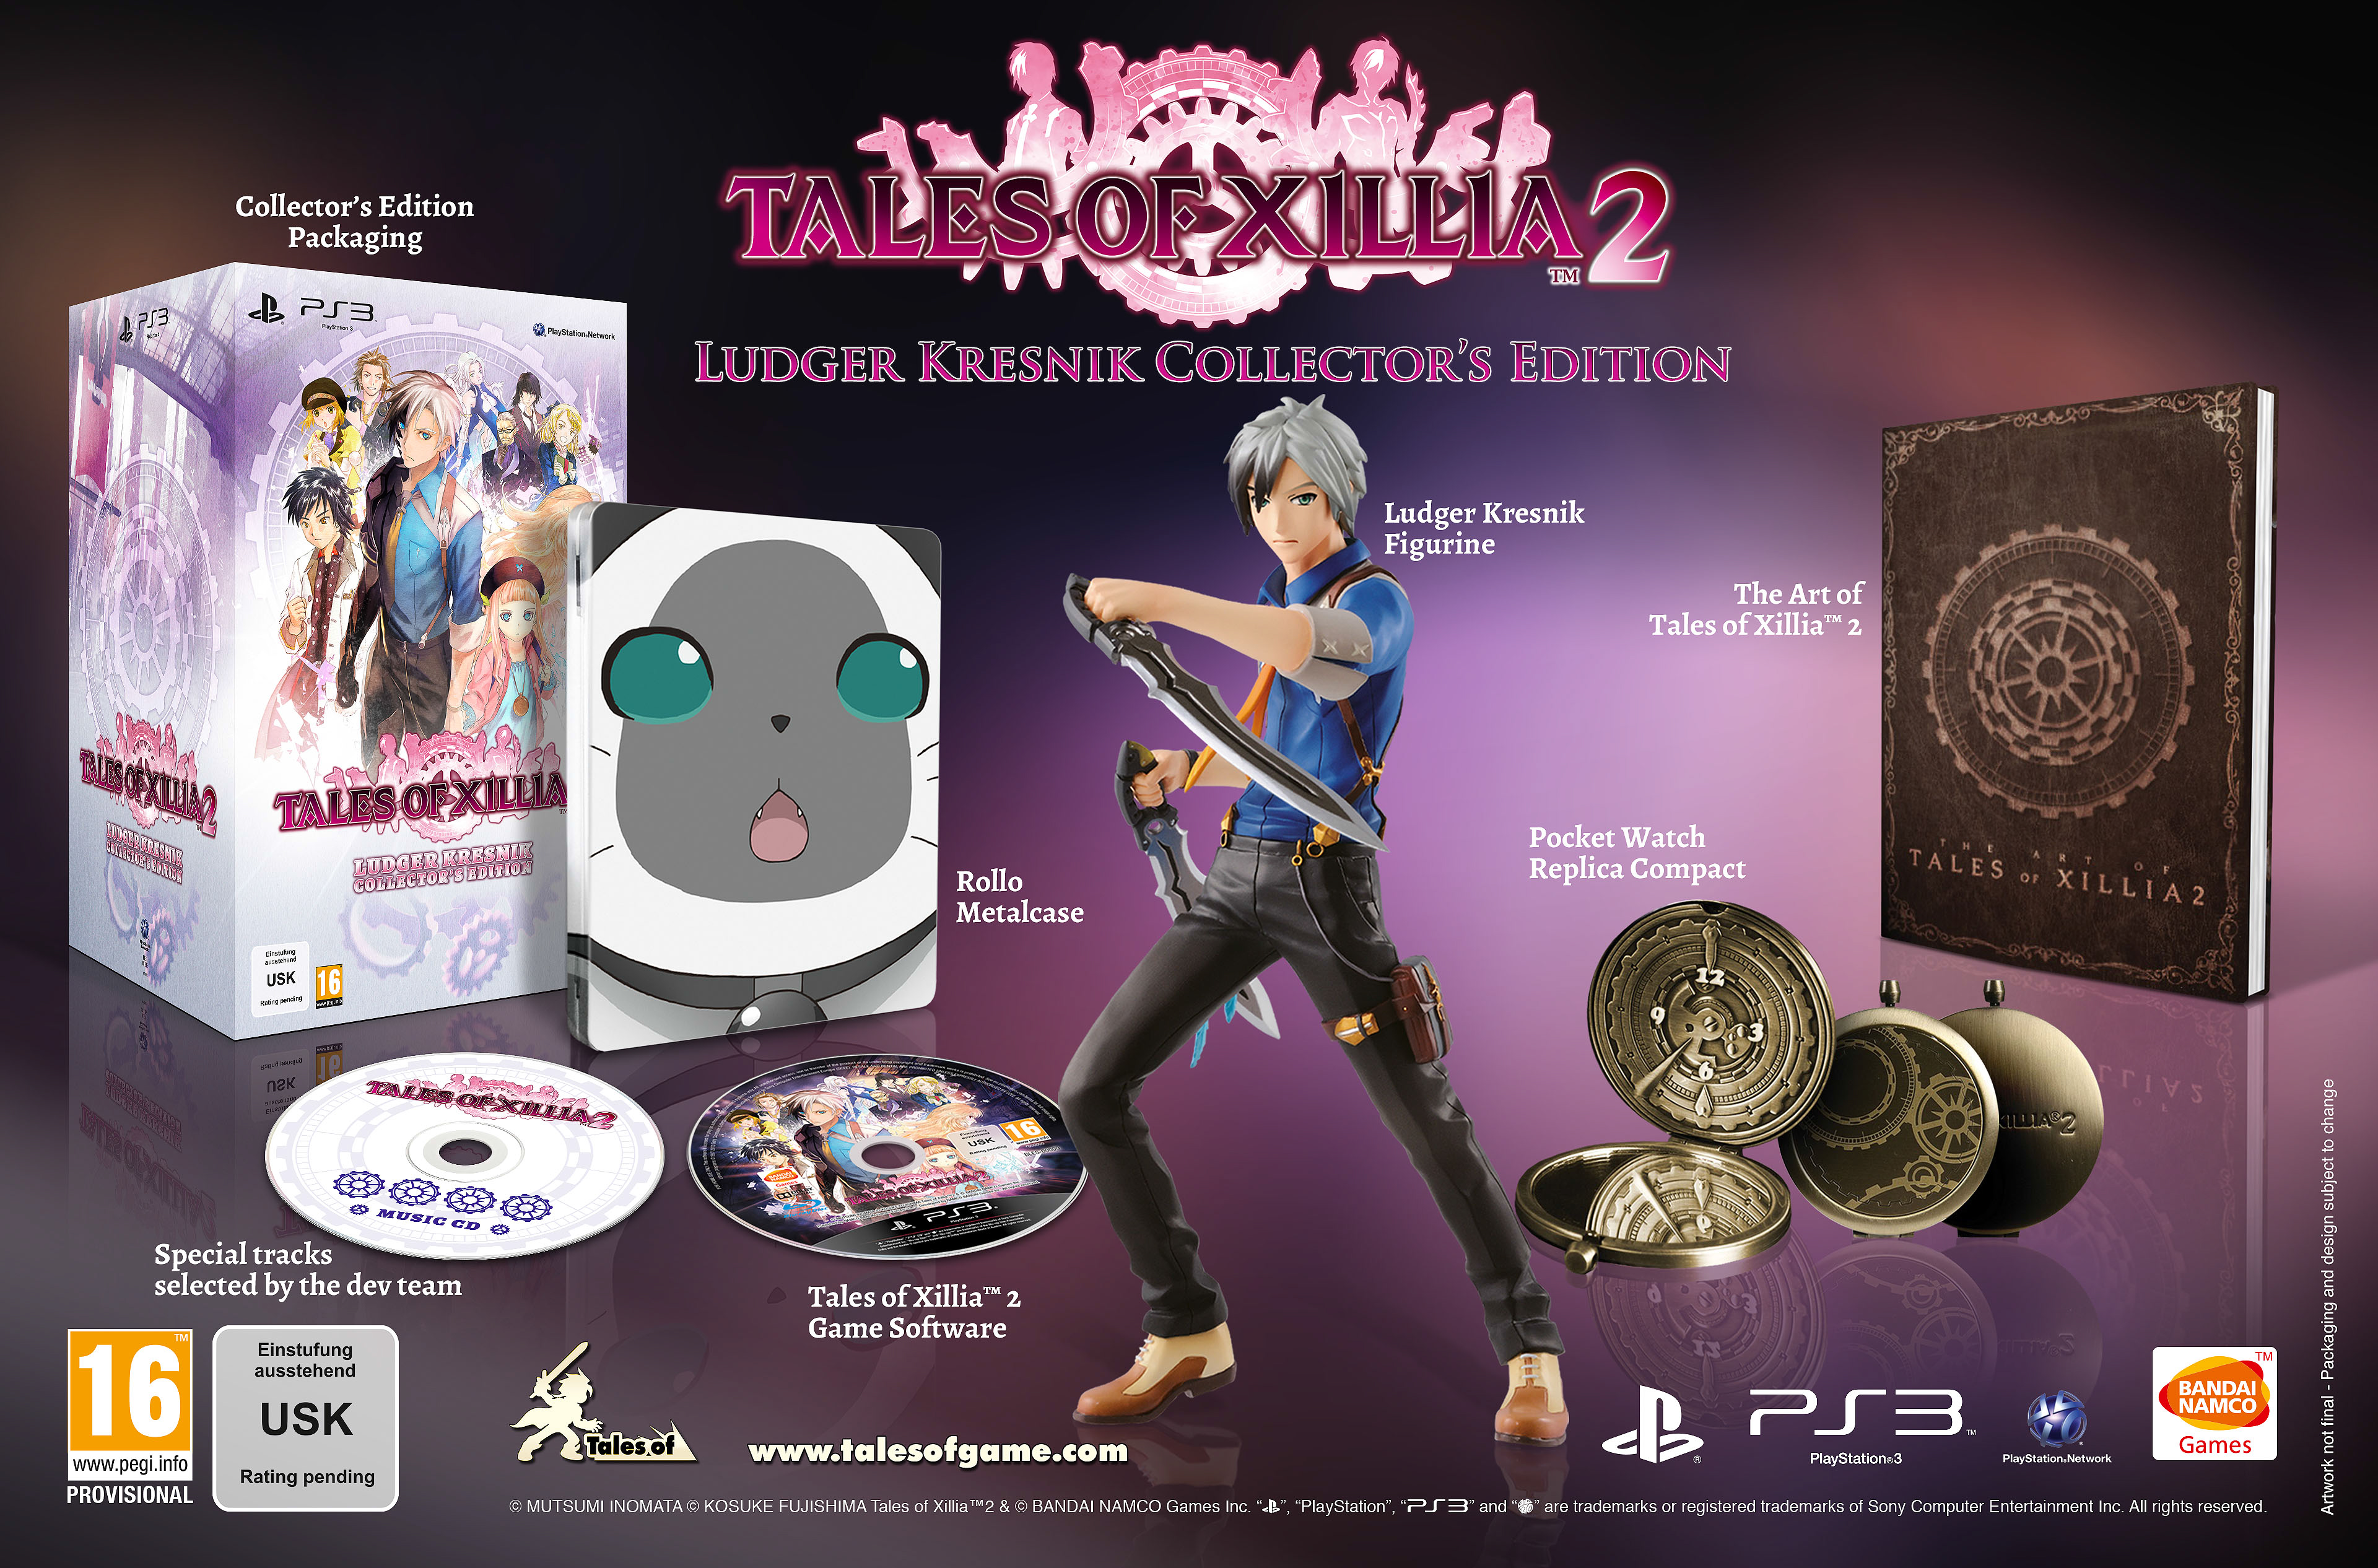 Tales of Xillia 2 Release Date is Confirmed, Collector’s Edition is Revealed